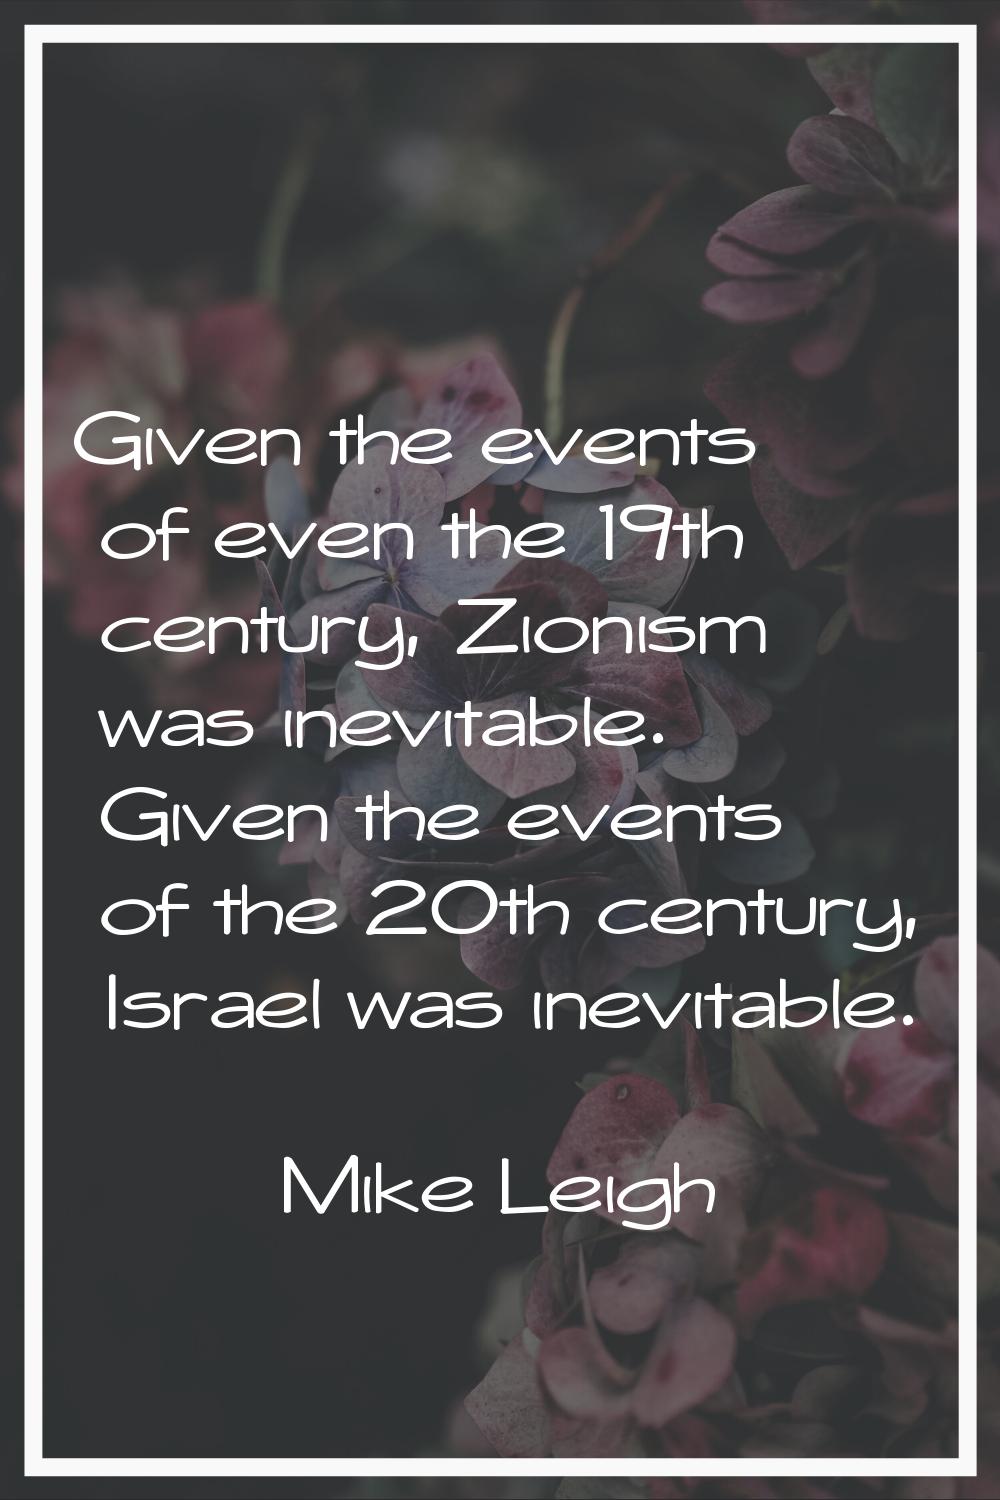 Given the events of even the 19th century, Zionism was inevitable. Given the events of the 20th cen